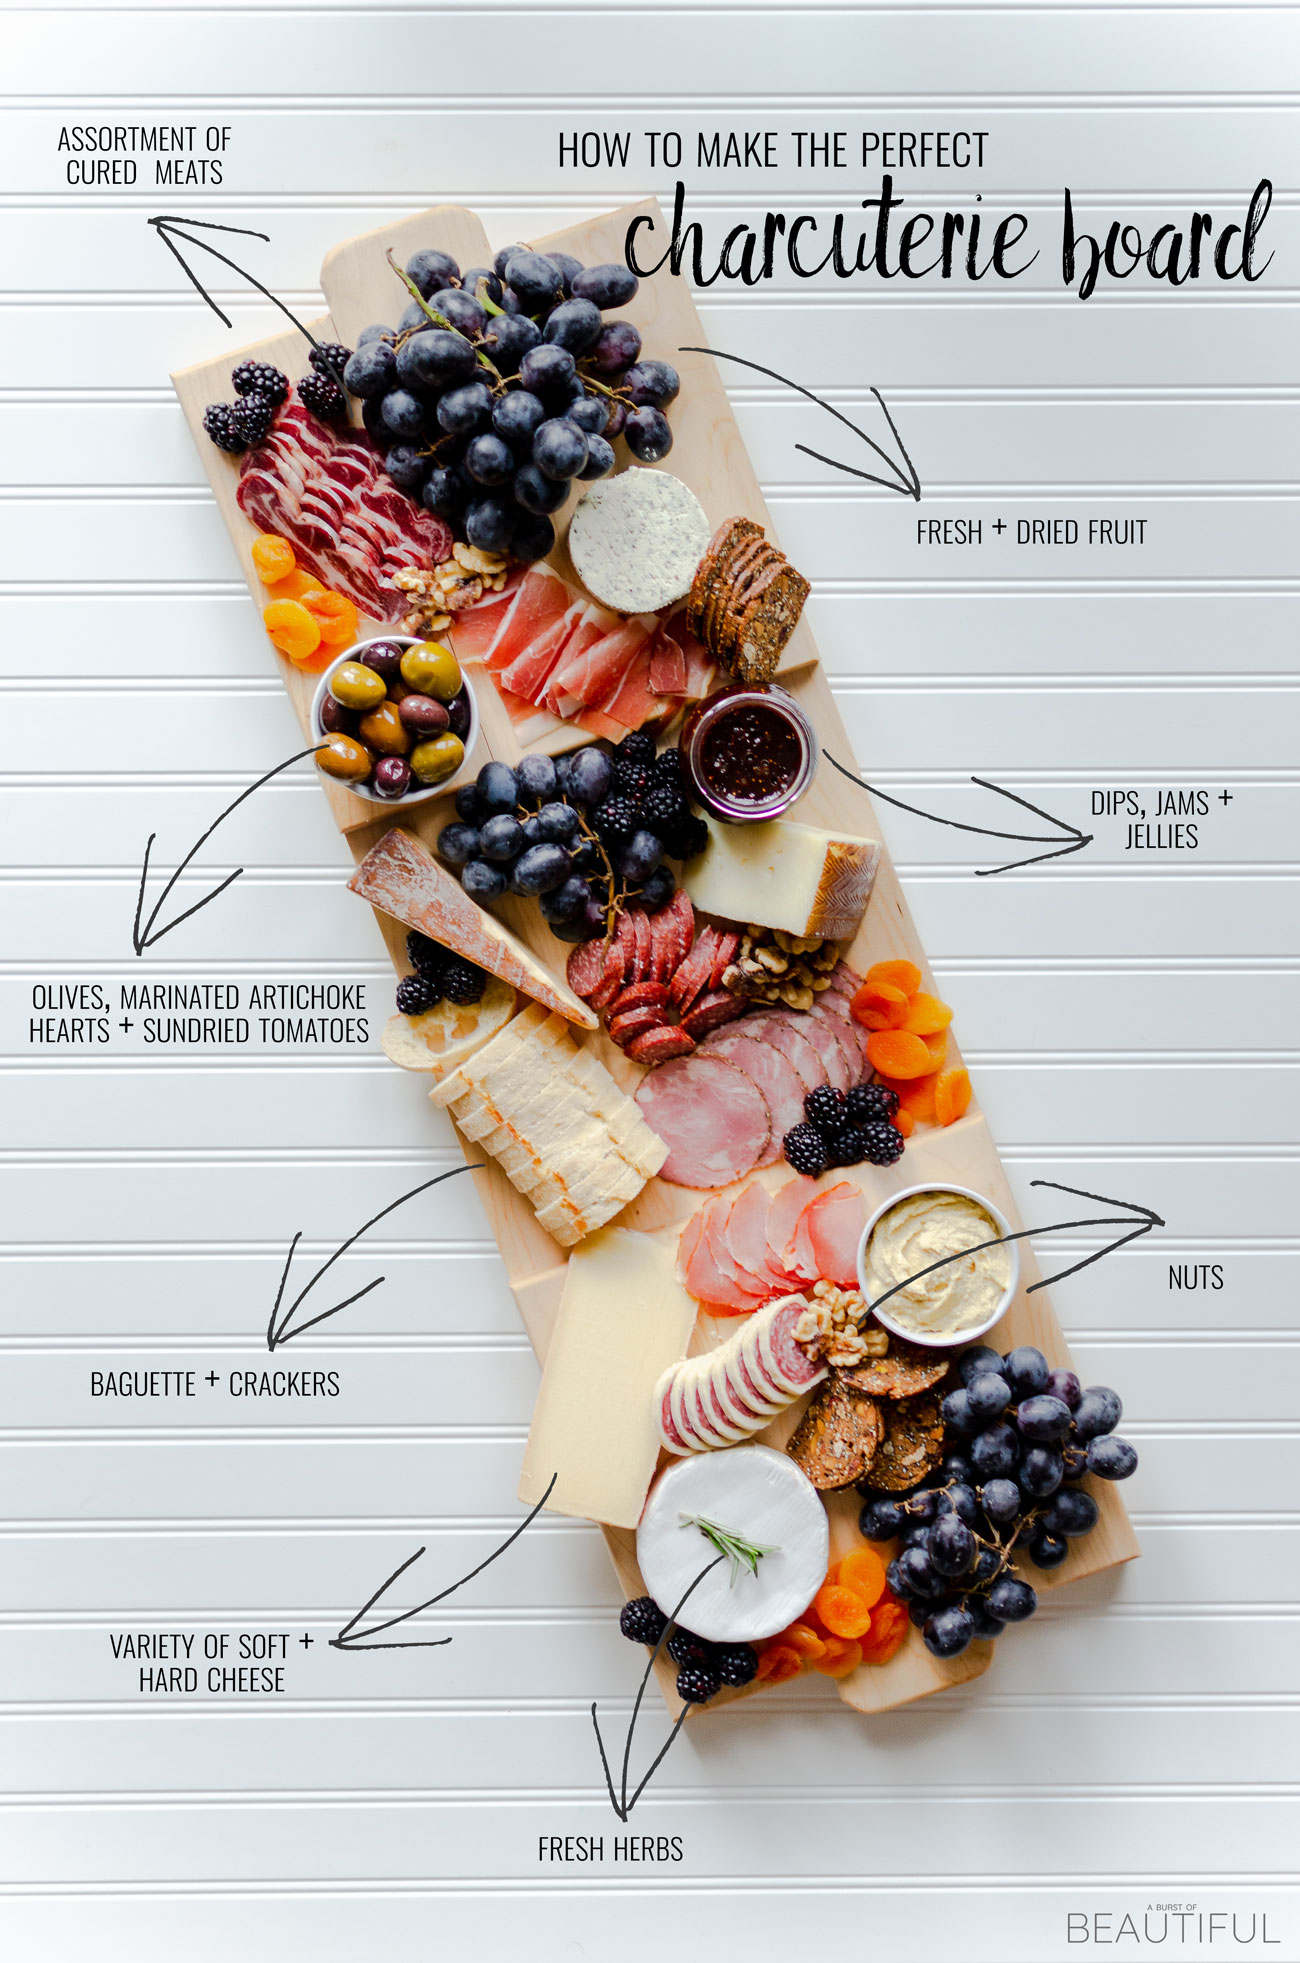 https://www.nickandalicia.com/wp-content/uploads/2018/11/How-To-Make-a-Charcuterie-Board-0114.jpg